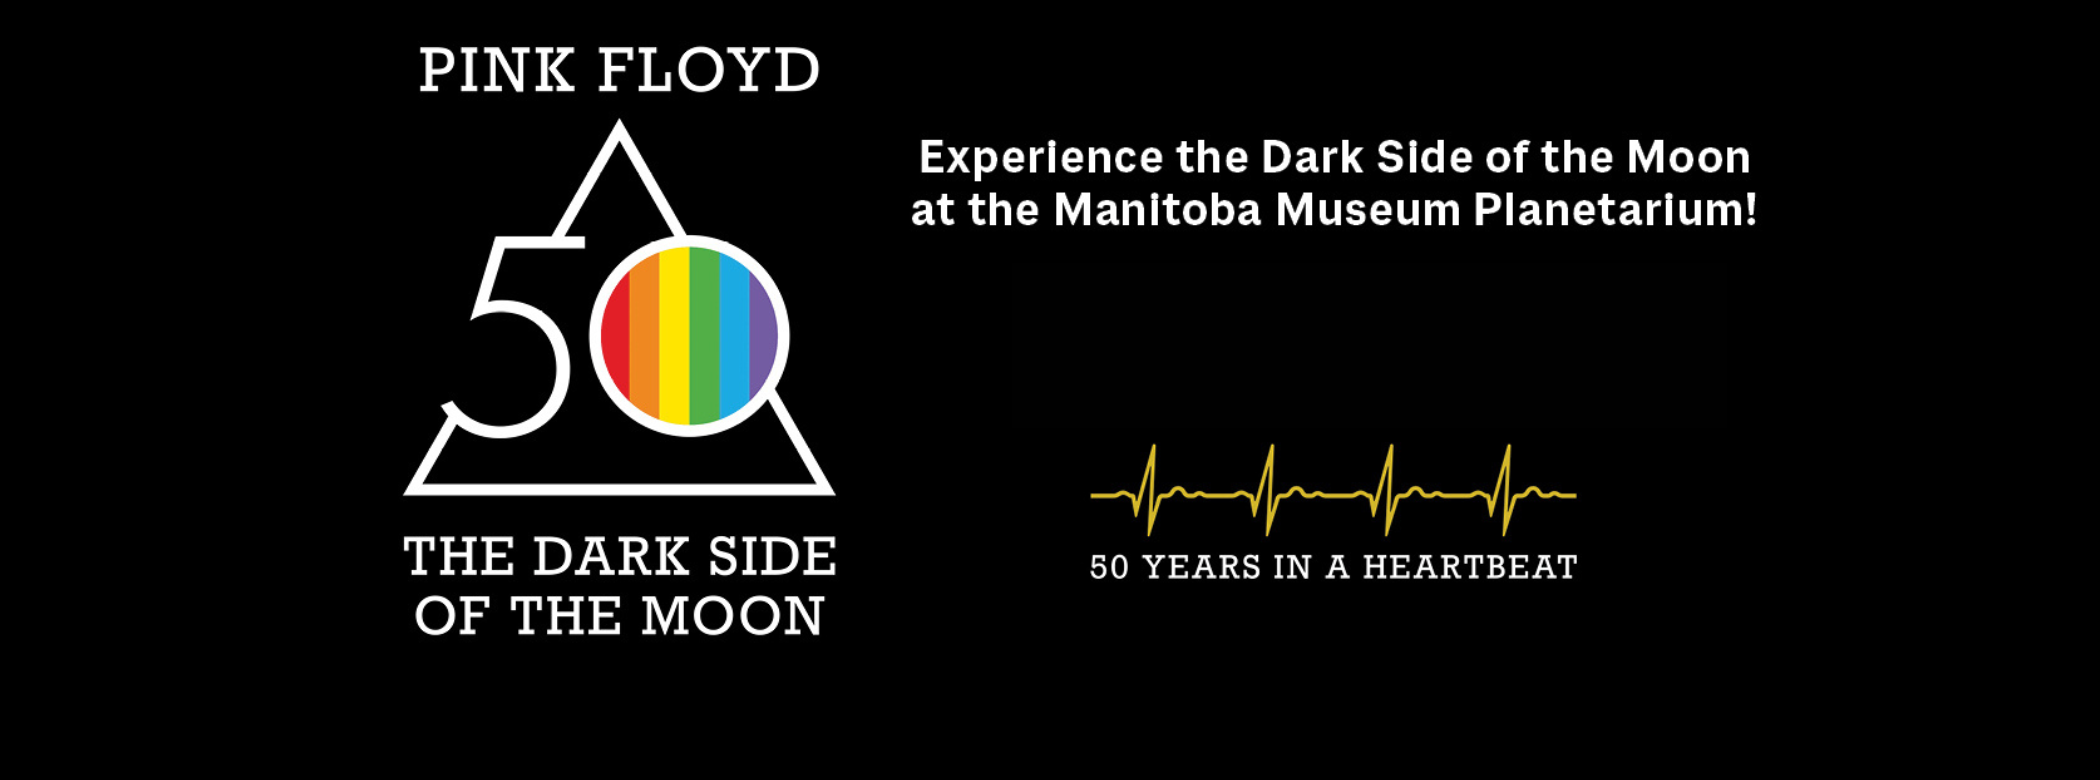 On the left is the iconic Pink Floyd triangle logo with the number 50 inlaid. In the centre of the 0 is the prism rainbow. Text reads, “Pink Floyd / The Dark Side of the Moon”. To the right text reads, “Experience the Dark Side of the Moon at the Manitoba Museum Planetarium” followed by a heartbeat line and “50 years in a heartbeat”.